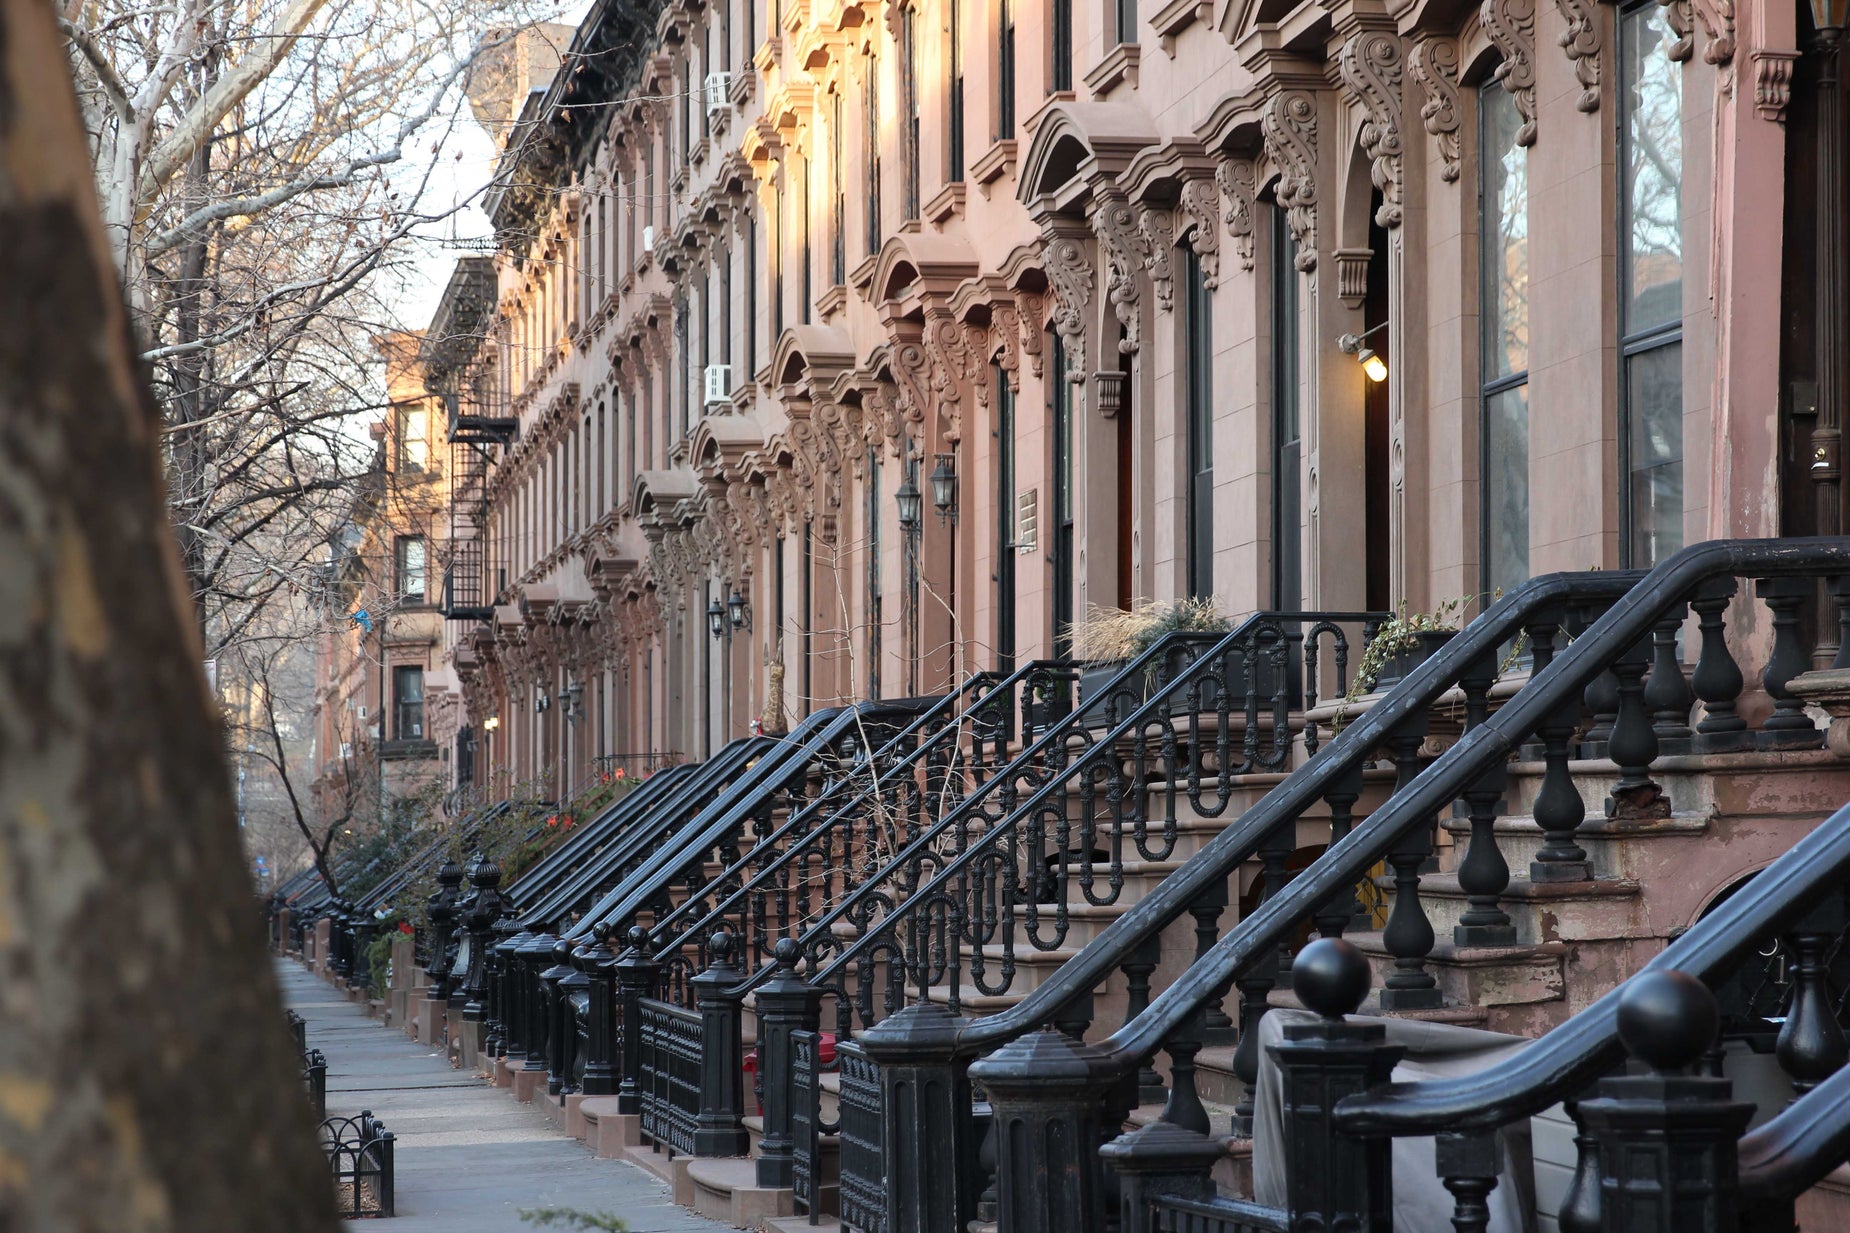 row houses lined with wrought iron railings in the city